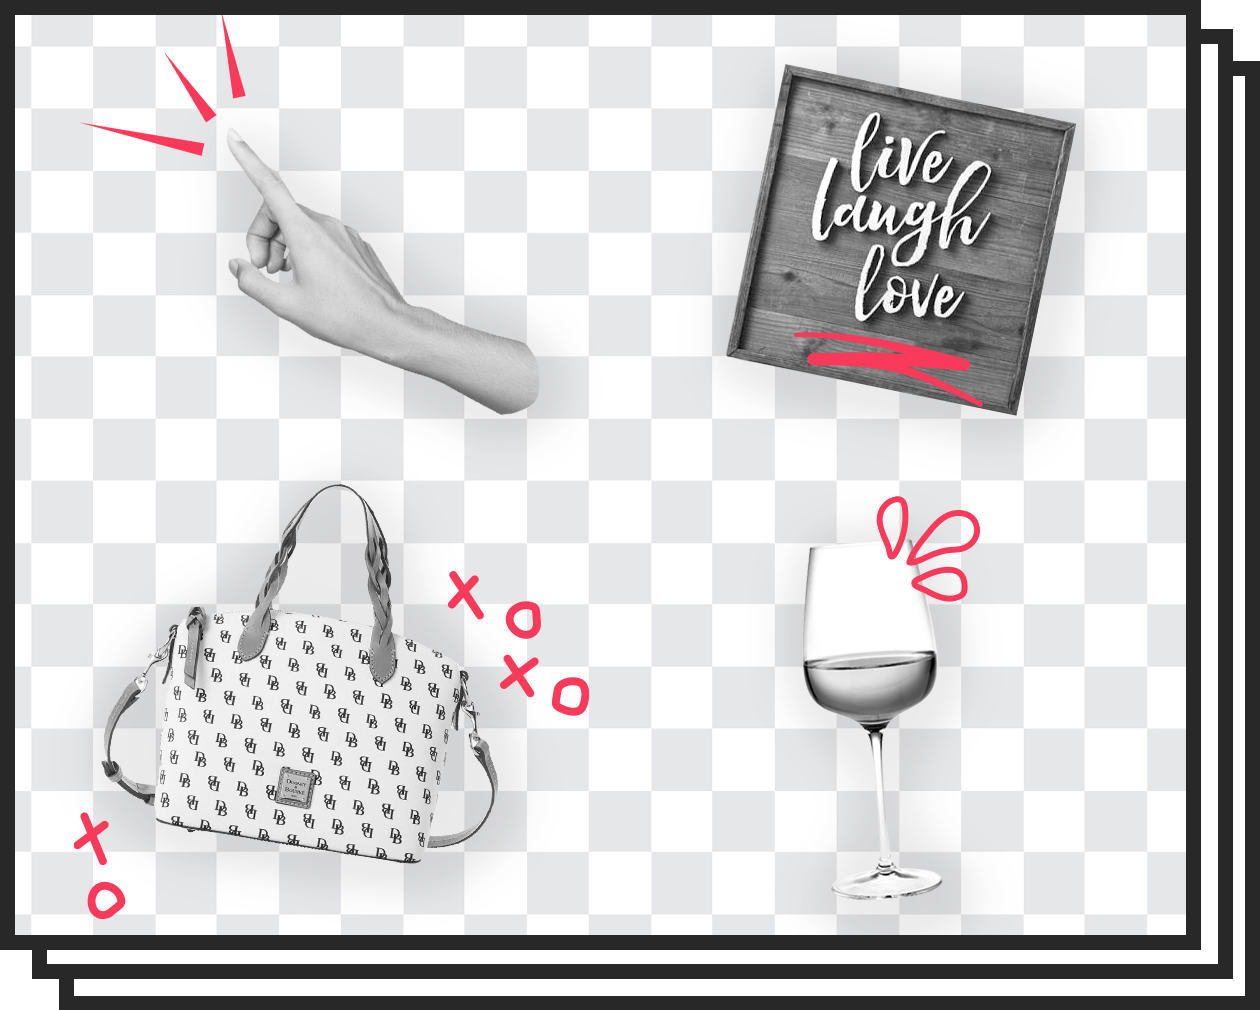 wagging finger, live laugh love sign, large purse, white wine glass